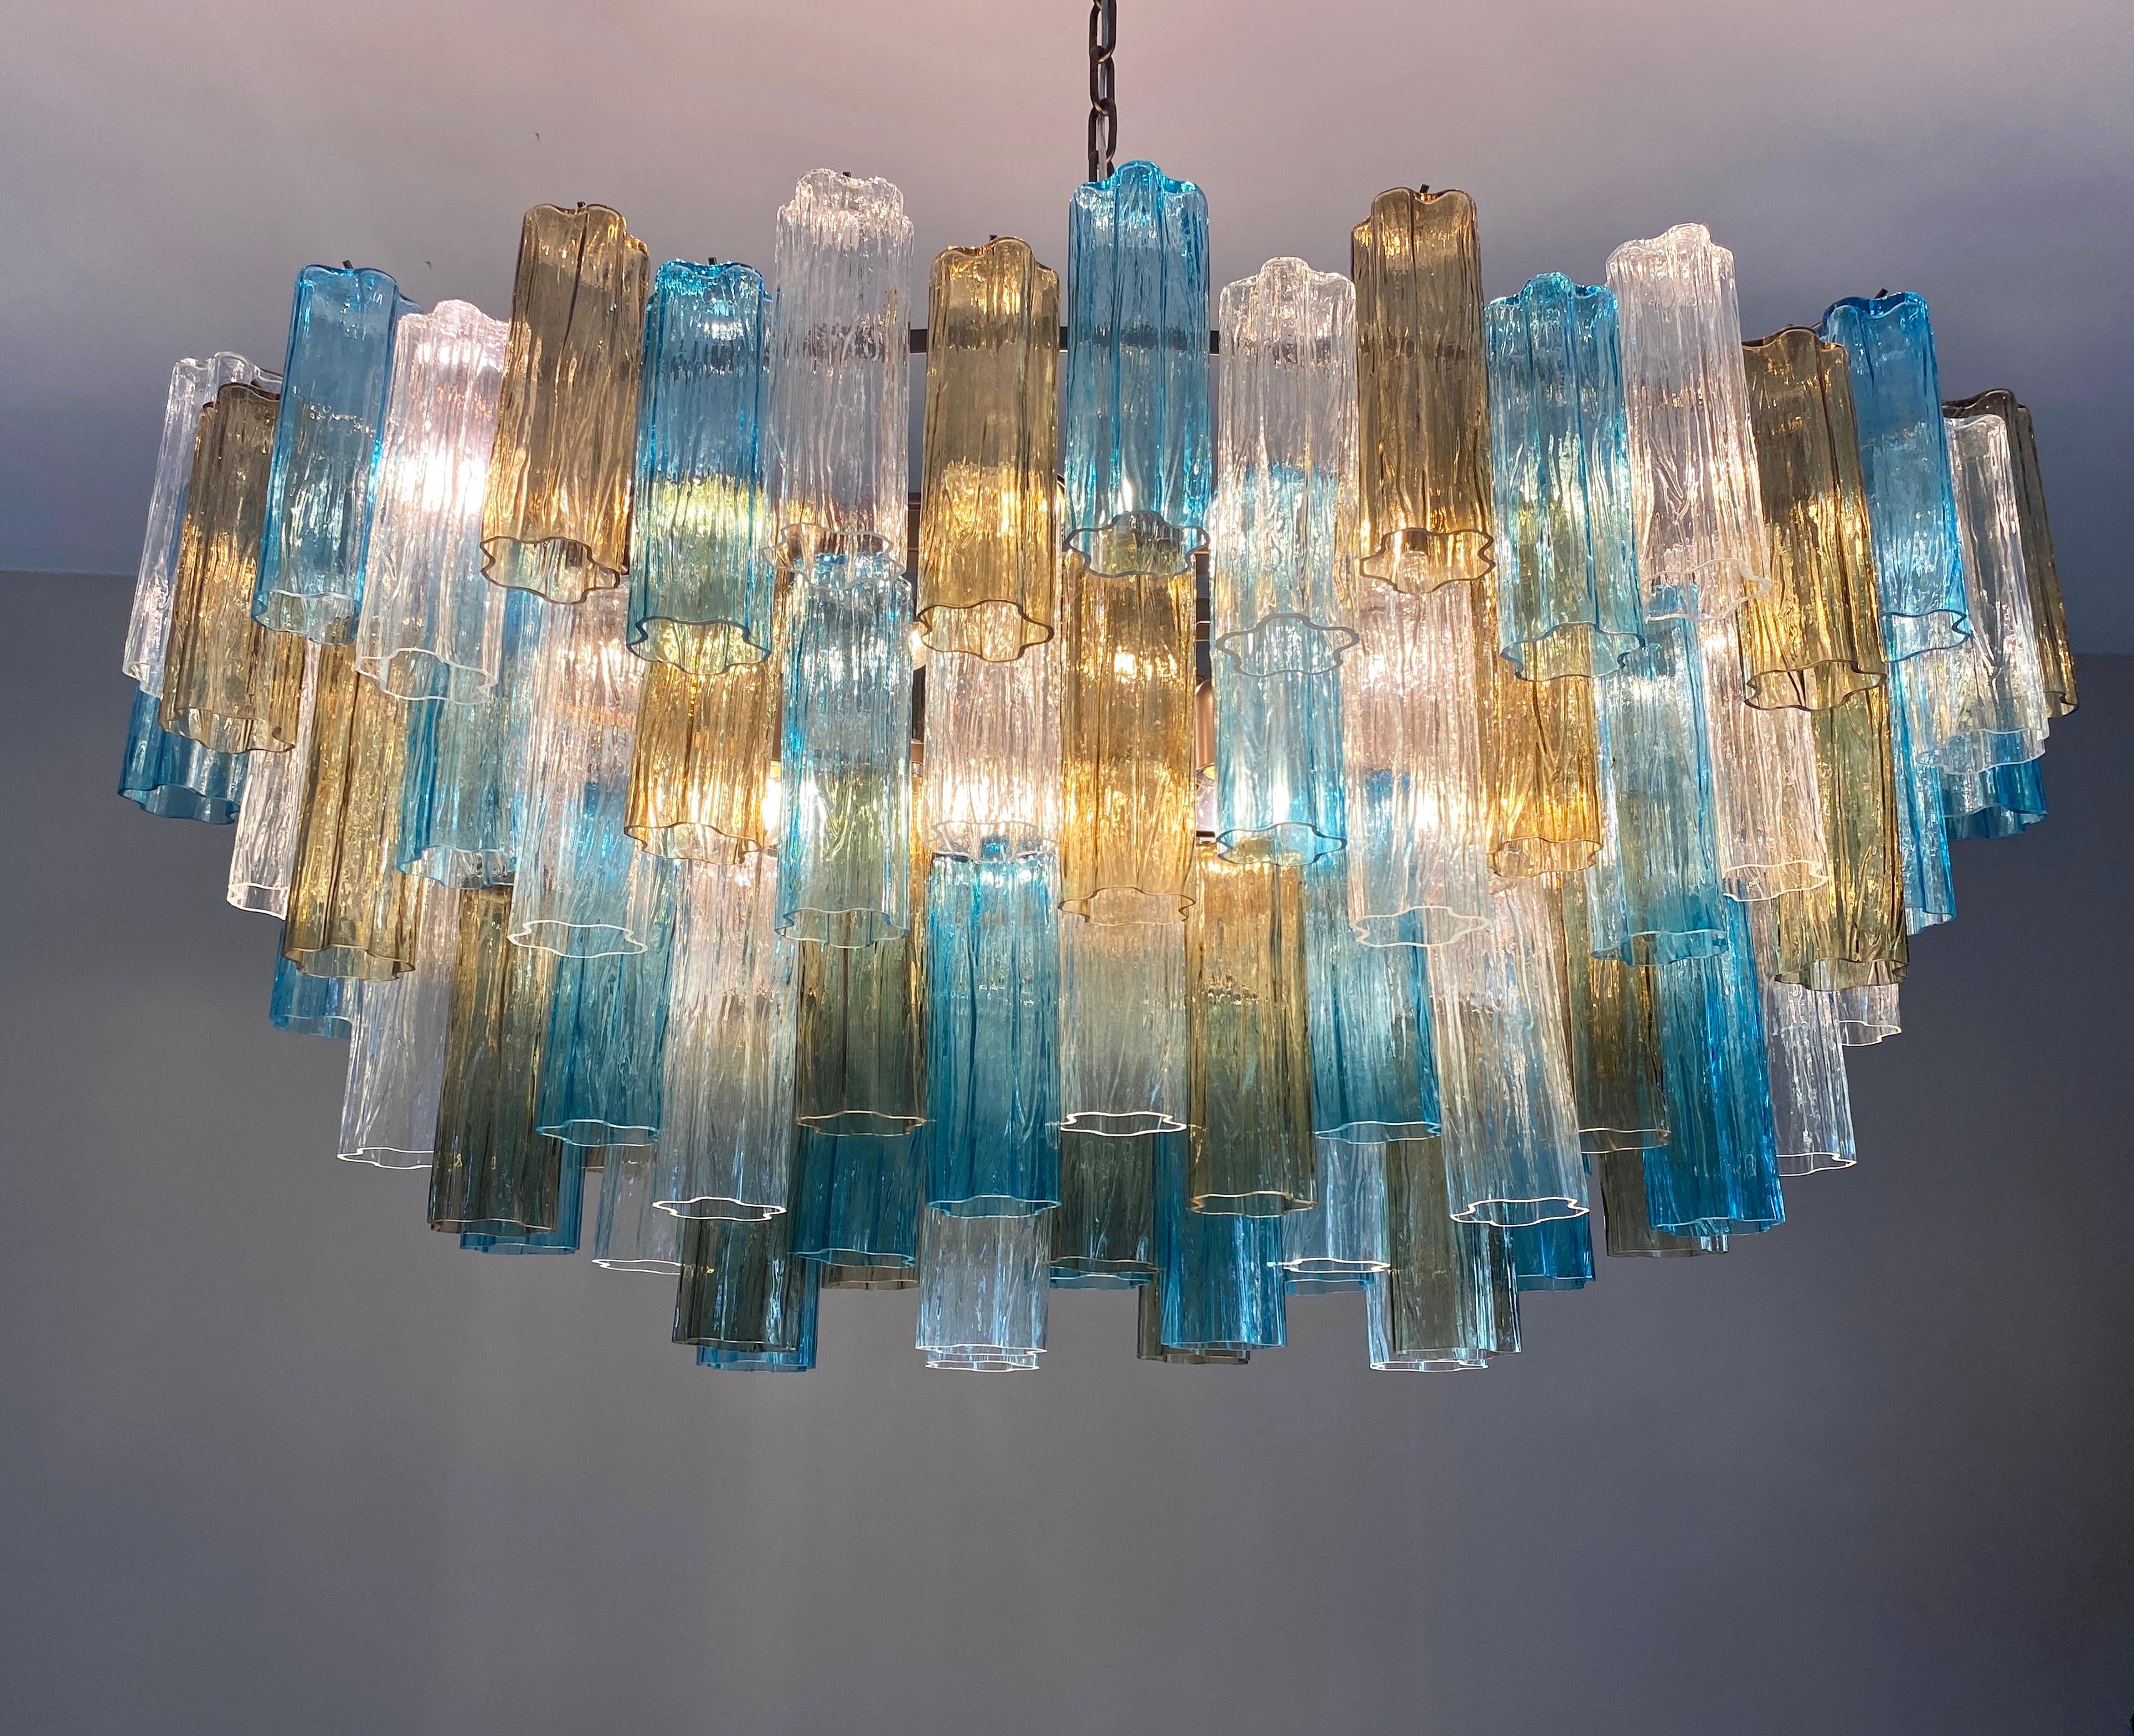 Outstanding Murano chandelier made by Murano crystal multicolored tronchi on  four  levels with a patinated bronze color metal frame.
The glasses are blu , clear and smoky, creating a fabulous light effect.
 We can customize tho combination of the